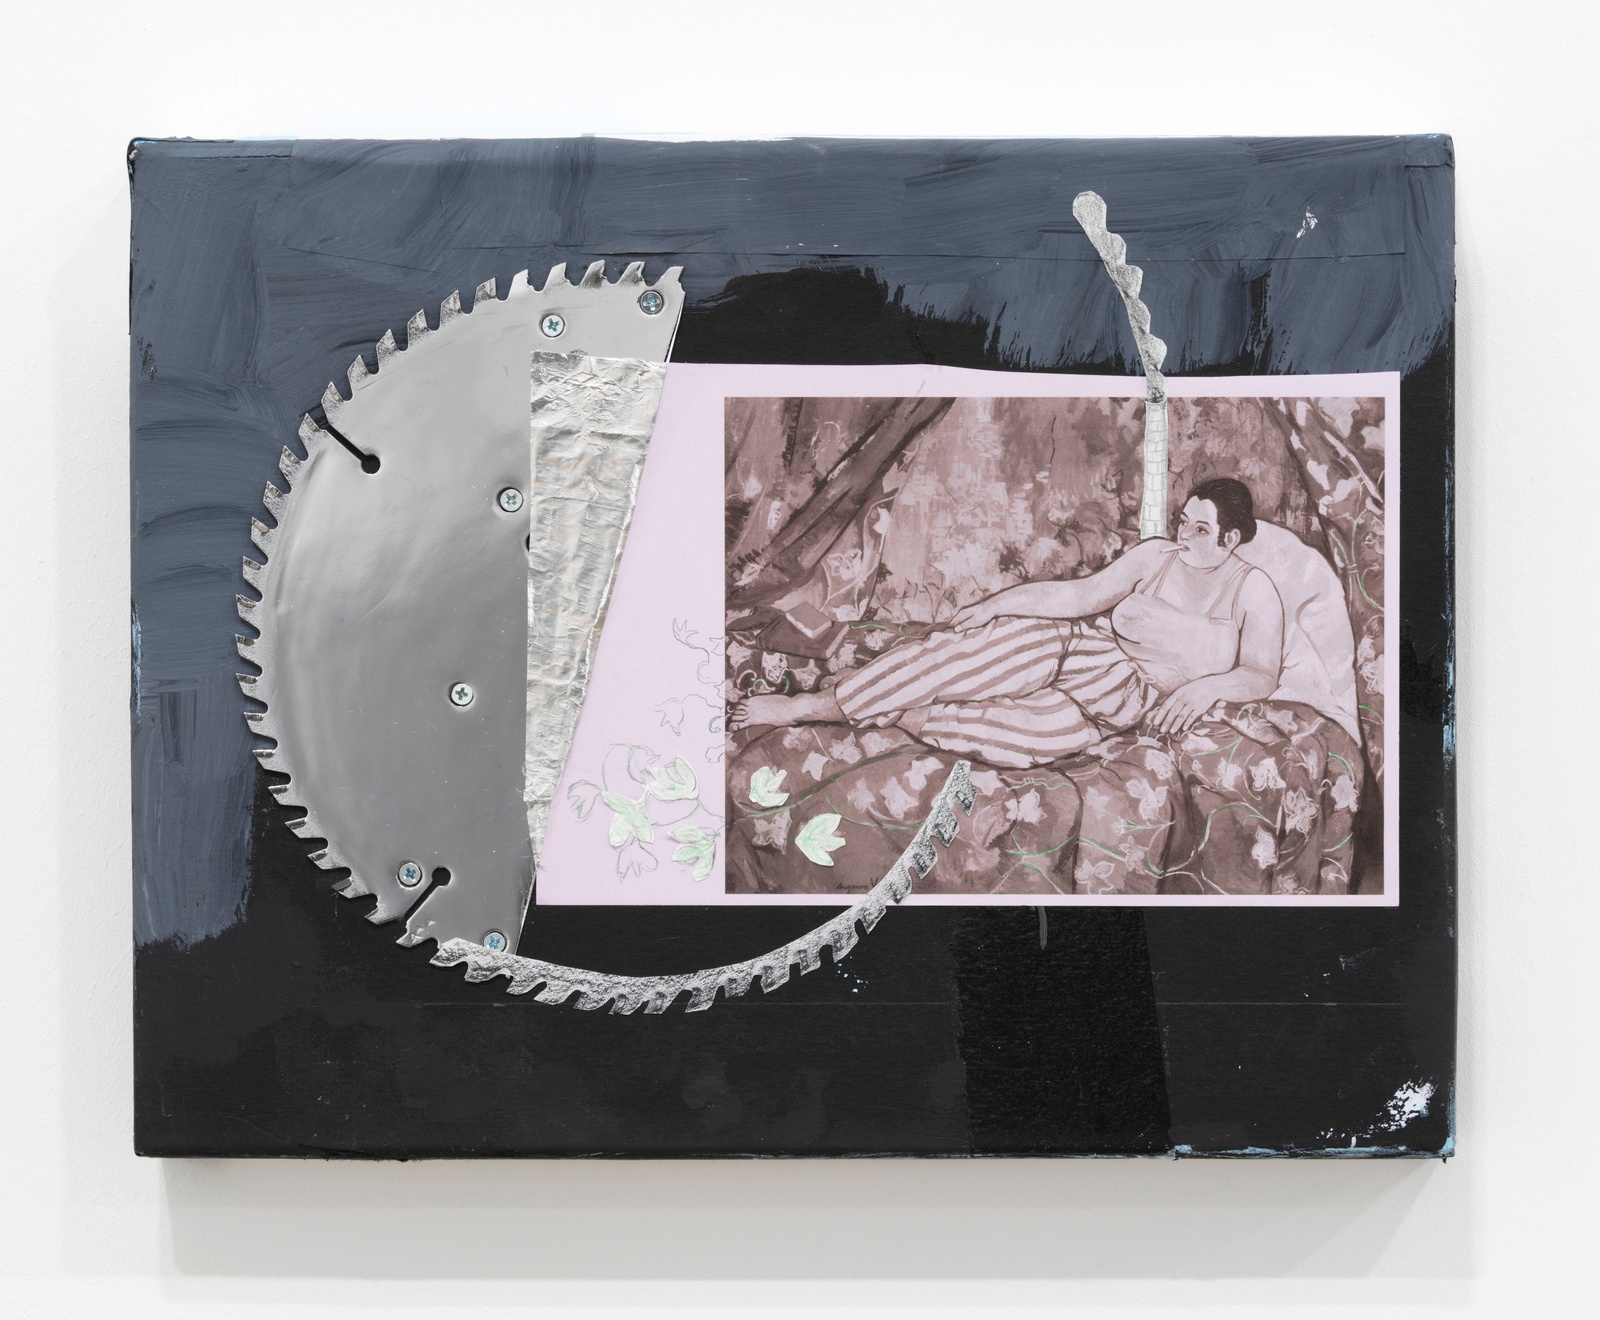 Blade, Not yet titled (with additions by Alice Creischer), 2020. pasteboard, paper, acrylic, chrome-plated saw blade. 24.5 x 32.5 x 4 cm